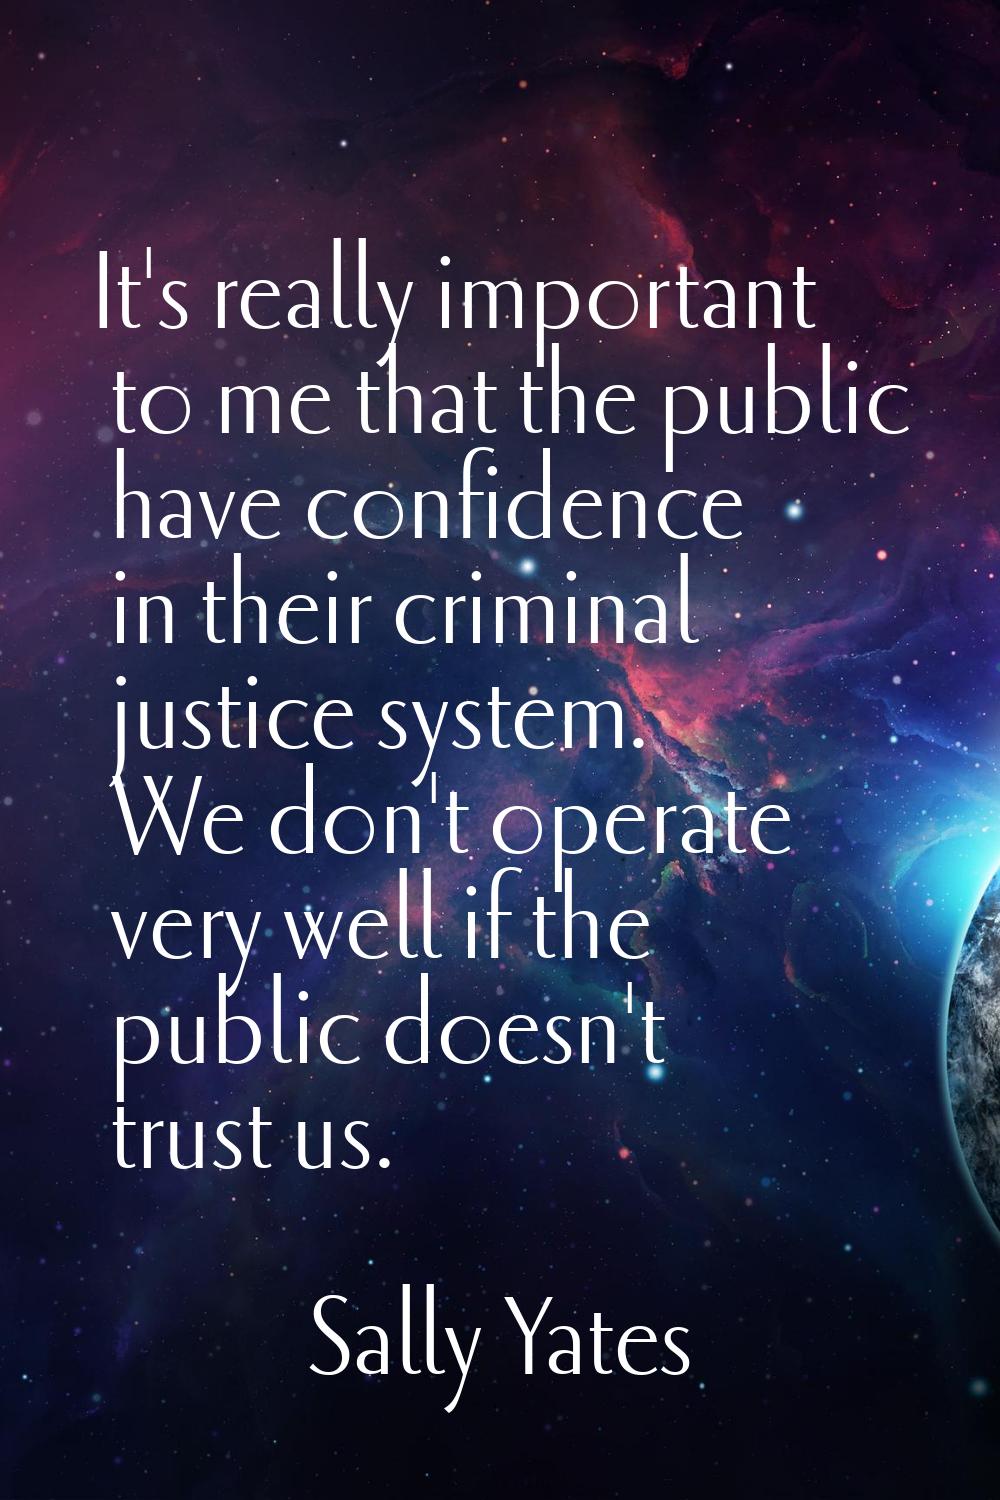 It's really important to me that the public have confidence in their criminal justice system. We do